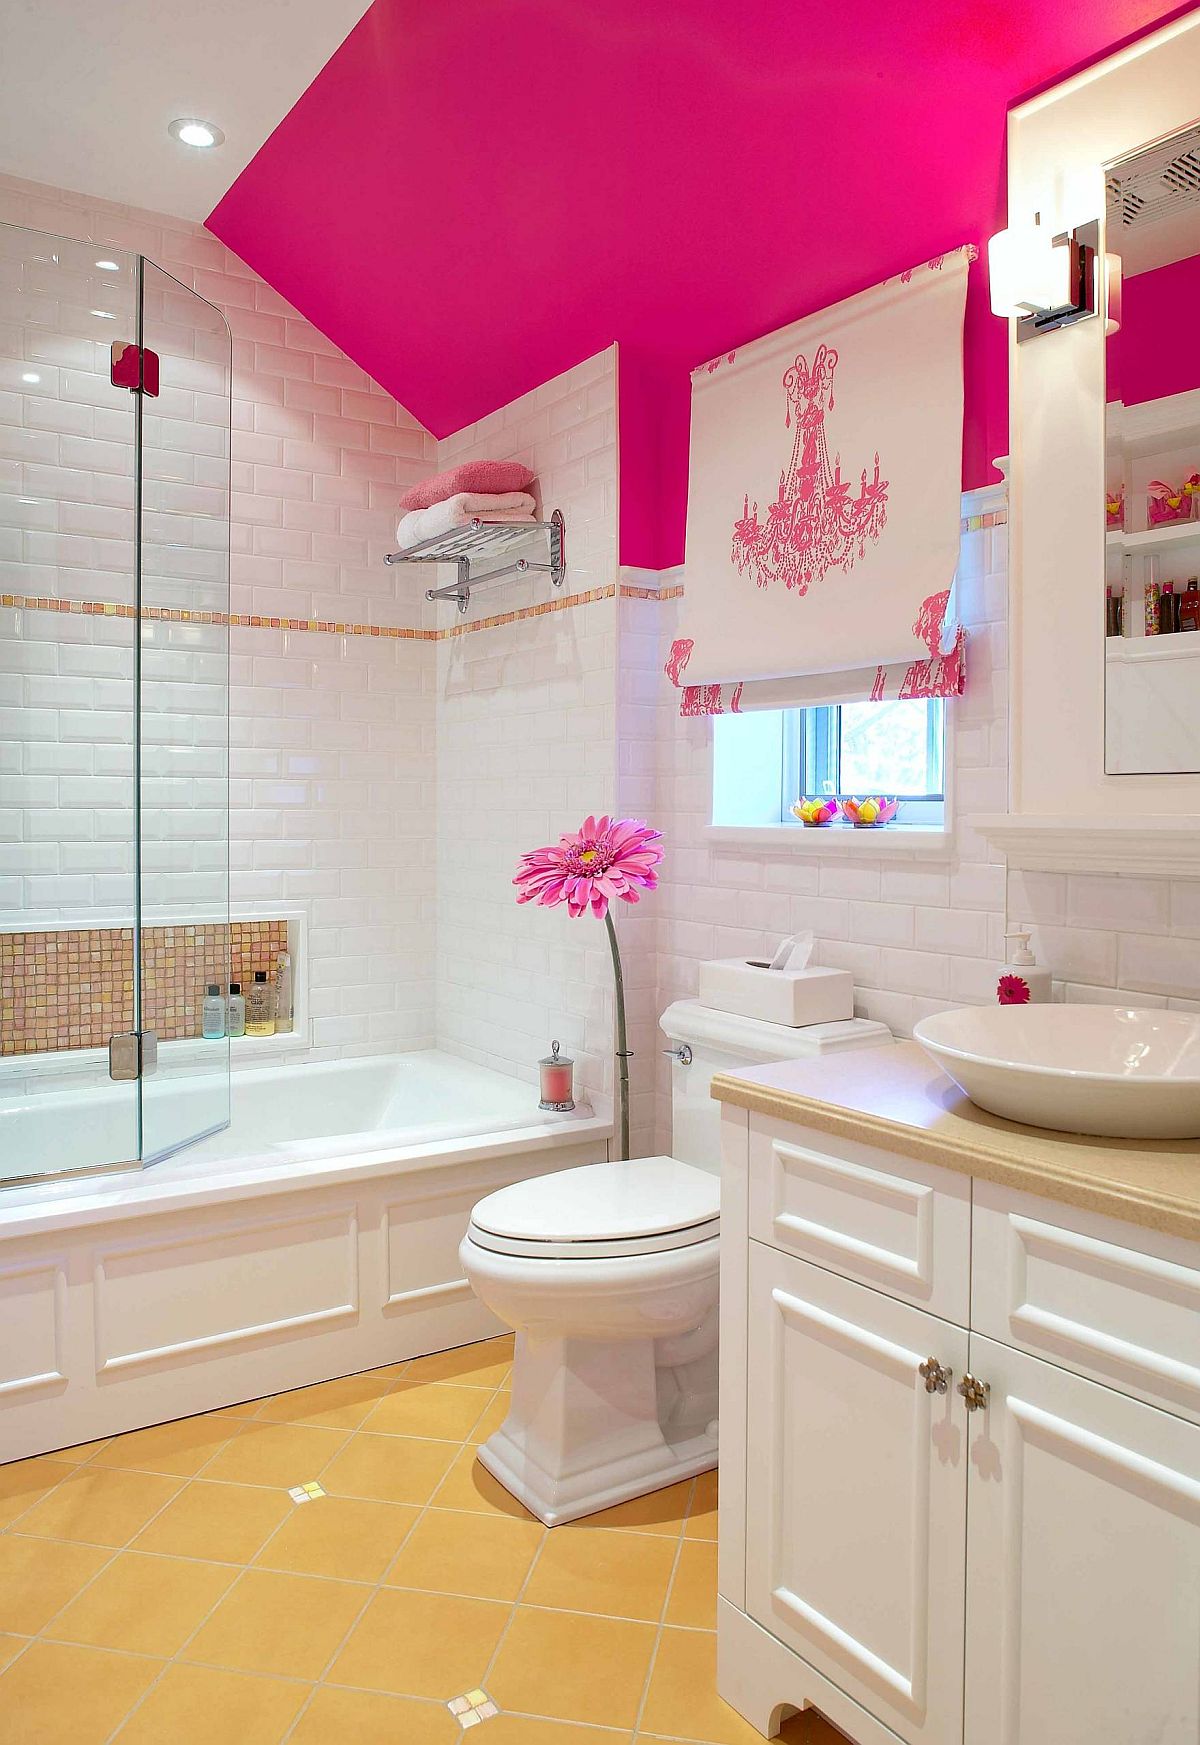 Little-pops-of-pink-accentuate-it-presence-in-this-lovely-modern-white-bathroom-10571